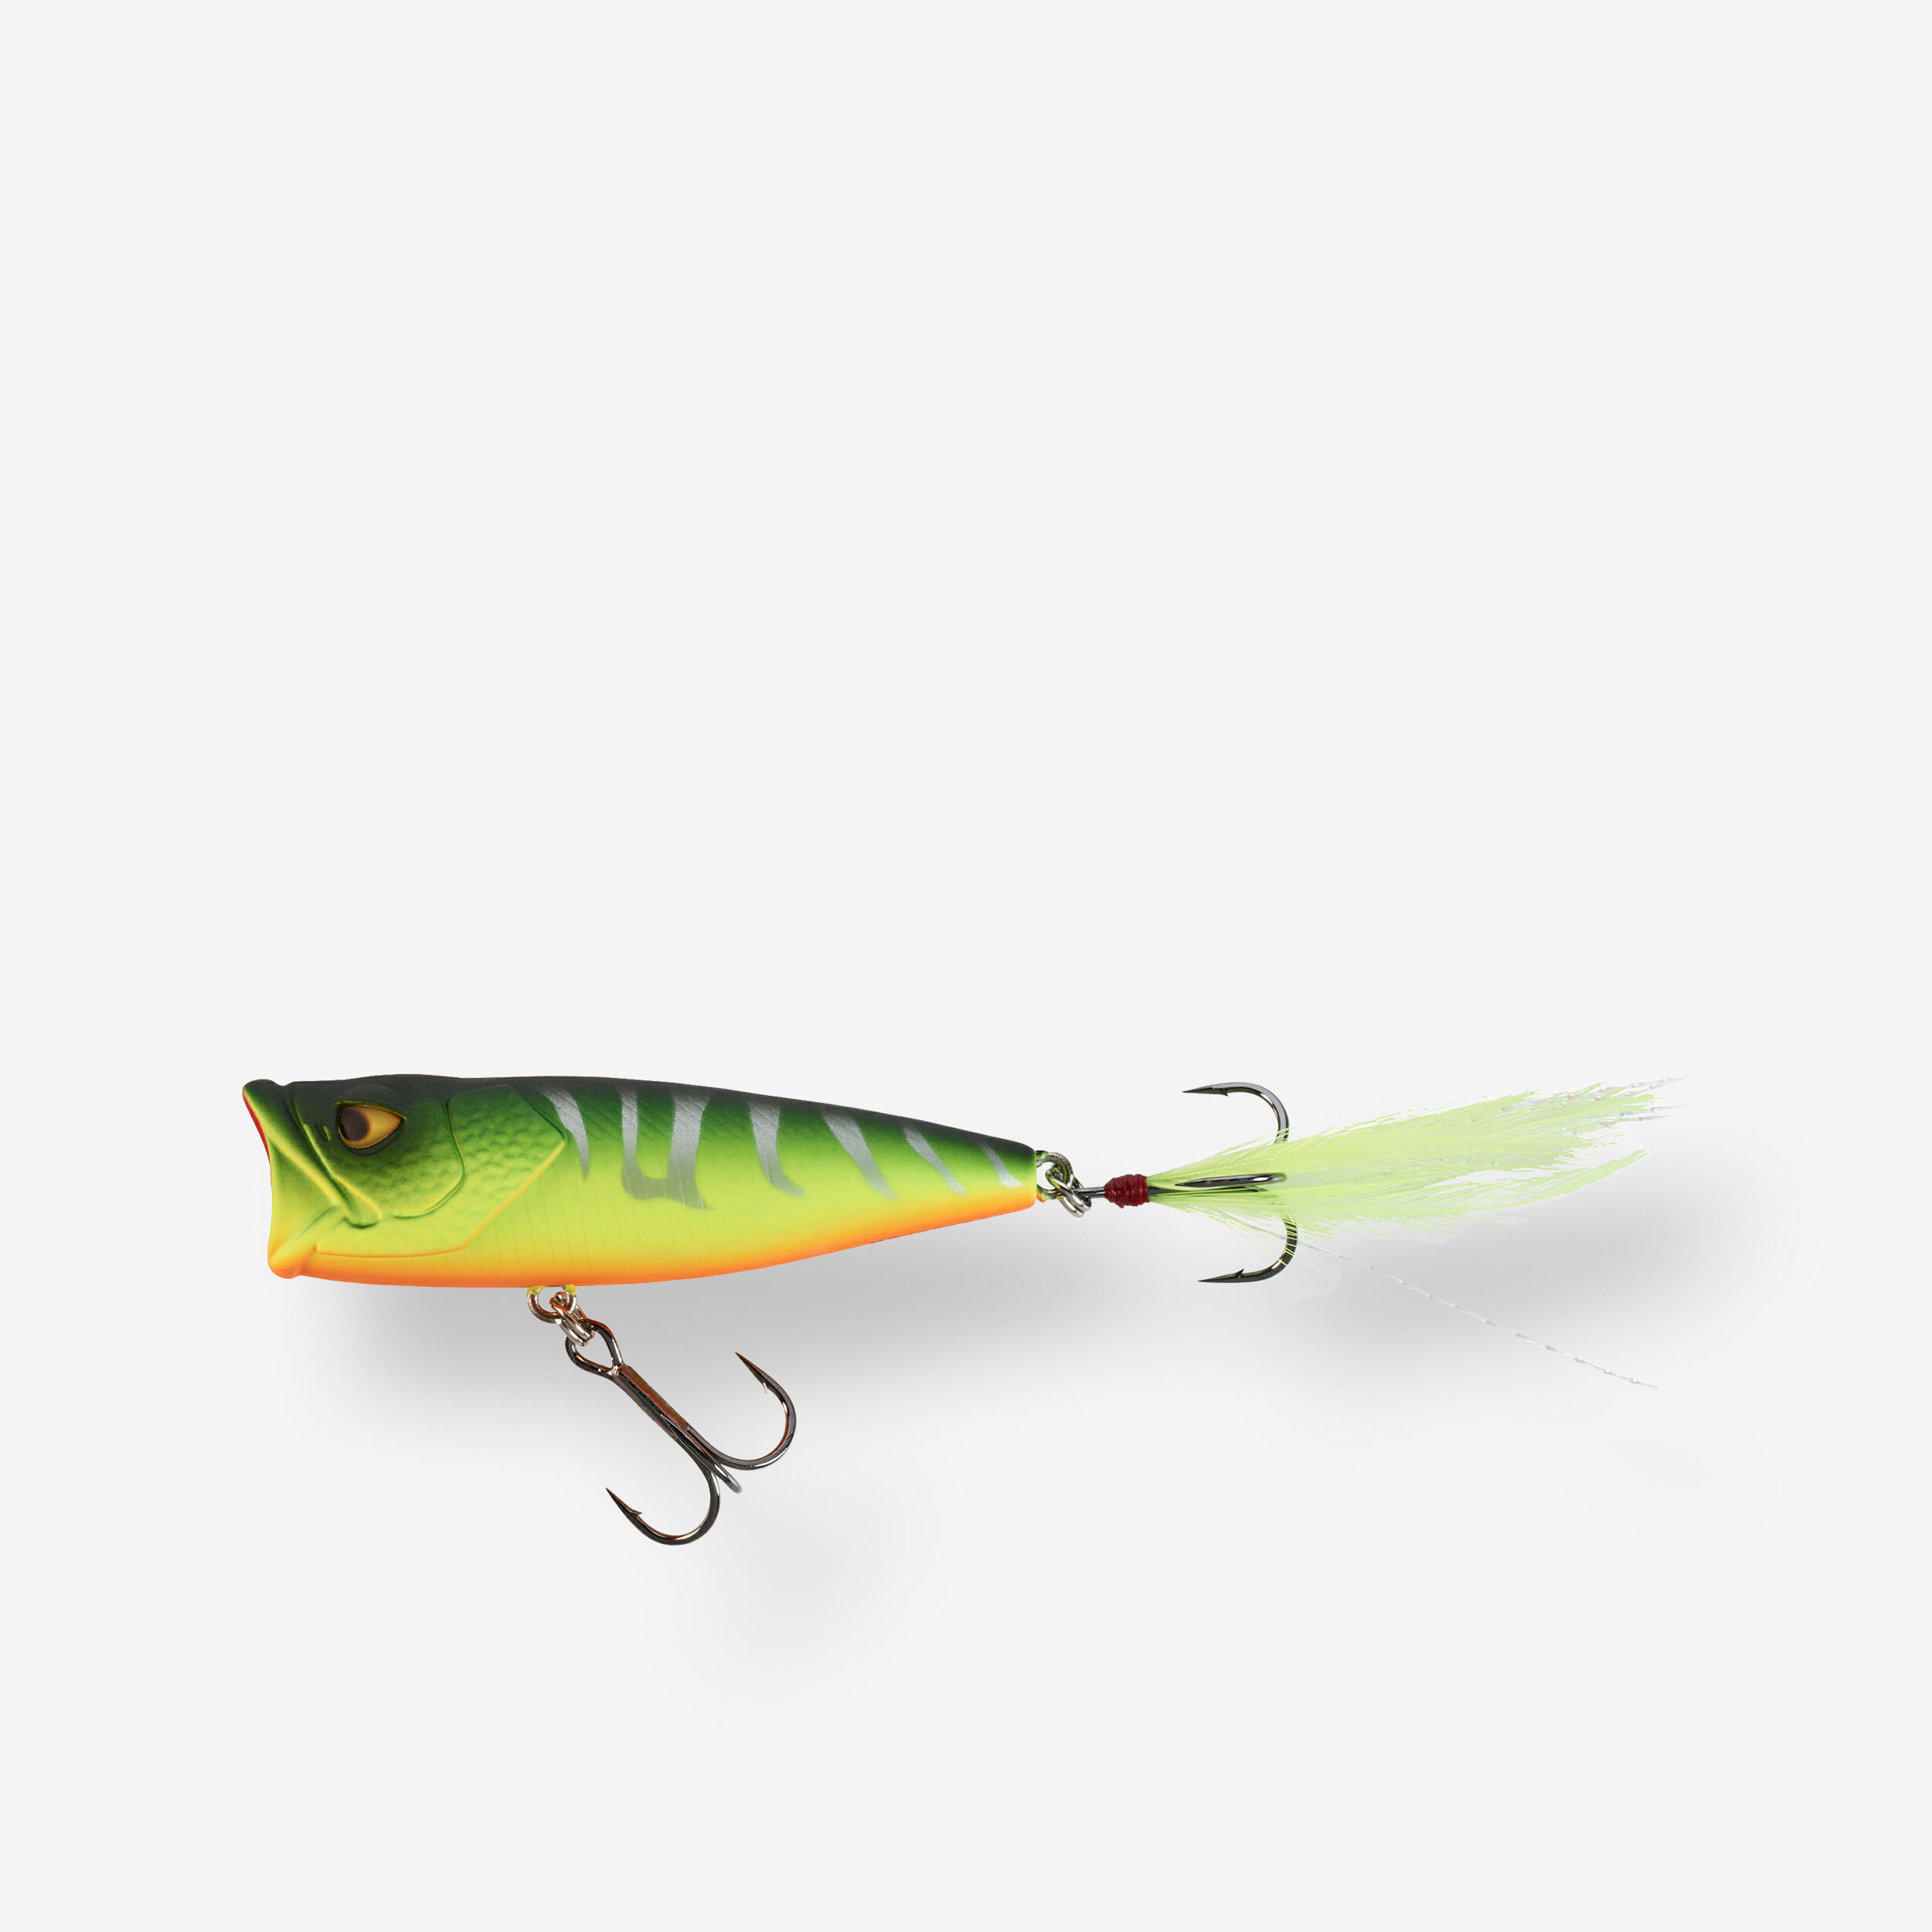 Popper Lure 20CM/116G Saltwater Fishing Lure Topwater Popper Lure  Artificial Bait 3D Eyes Big Game Hard Baits with Treble Hooks for GT  Striped Bass,Trout,Tuna,Kingfish (B), Topwater Lures -  Canada